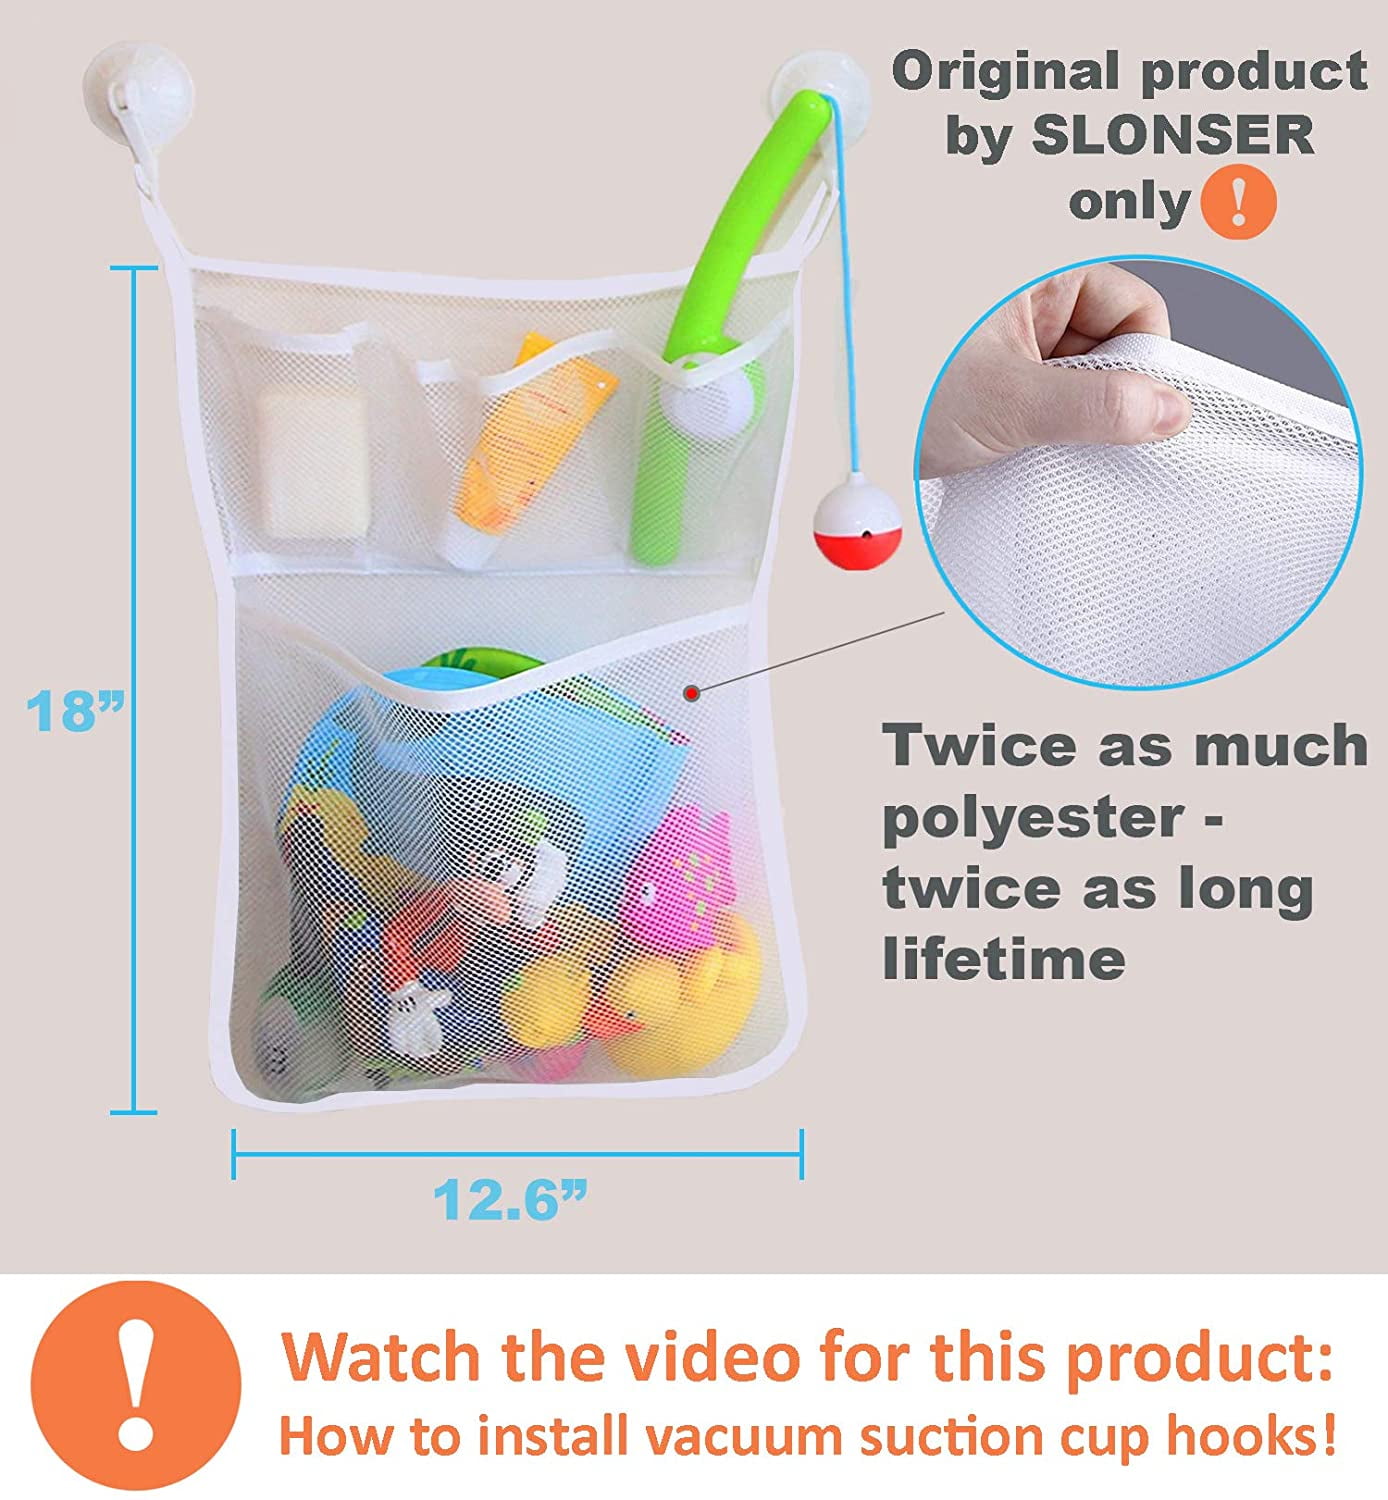 suction toy holder